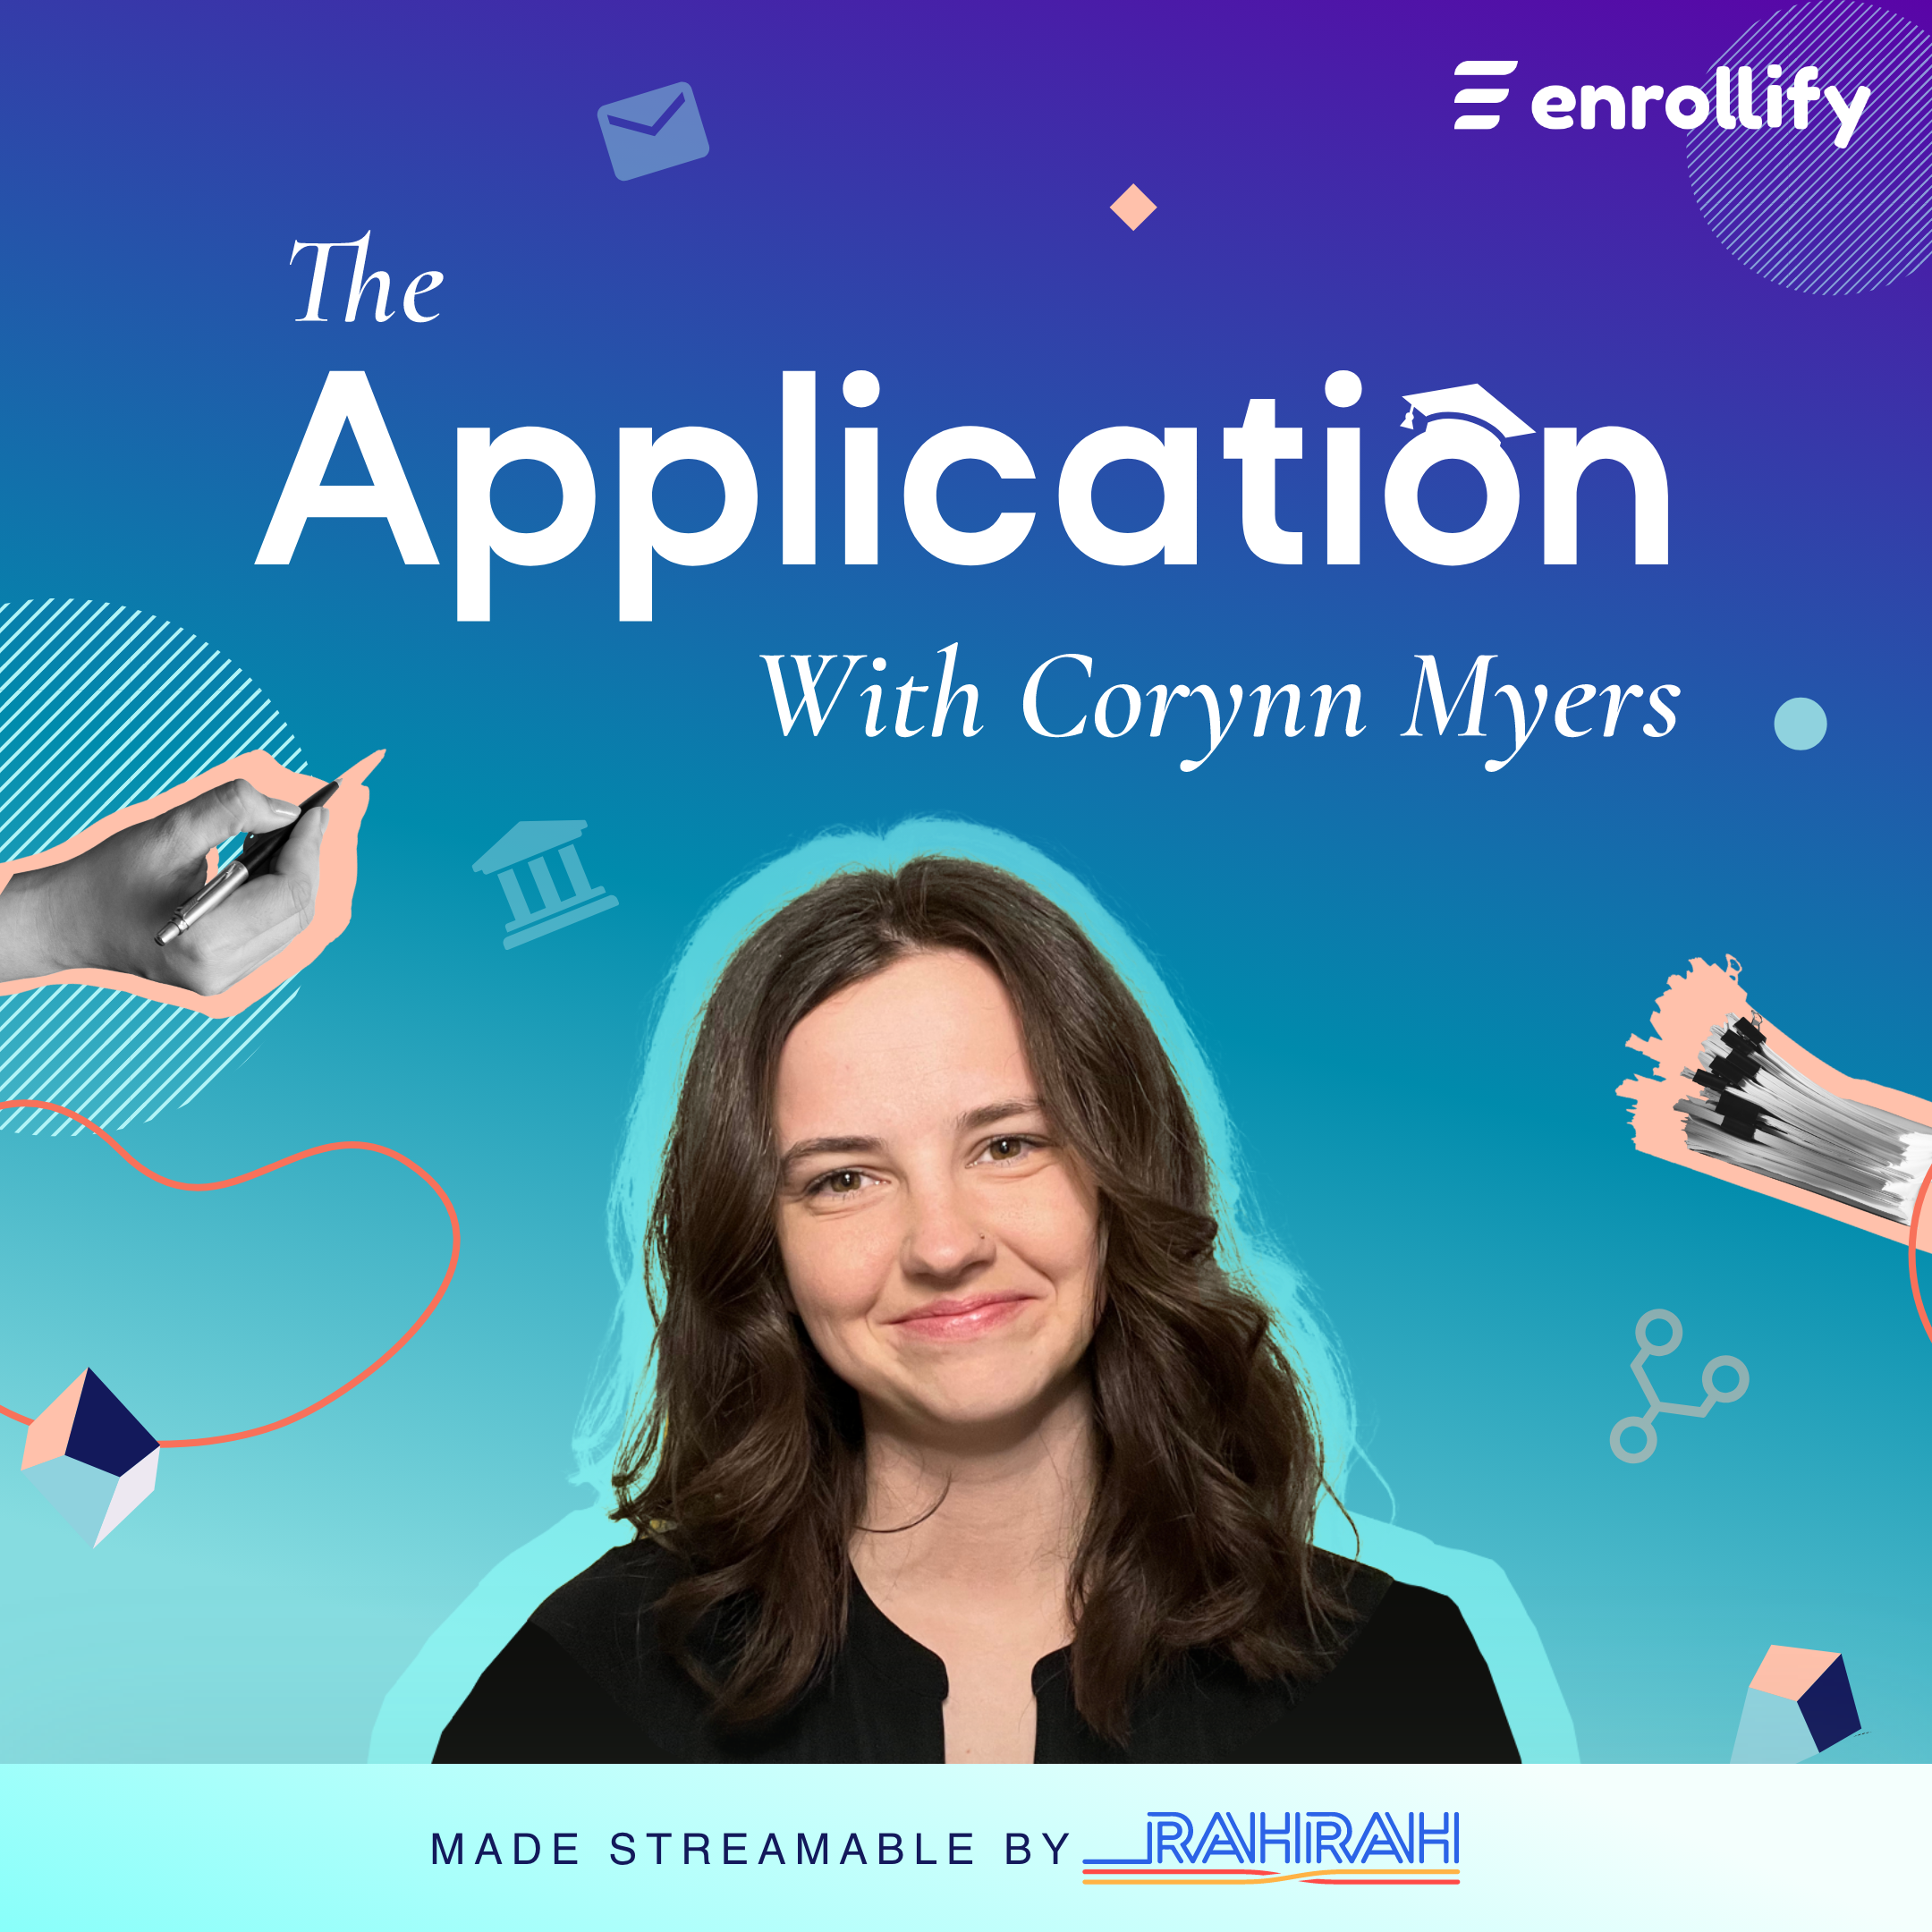 The Application with Corynn Myers